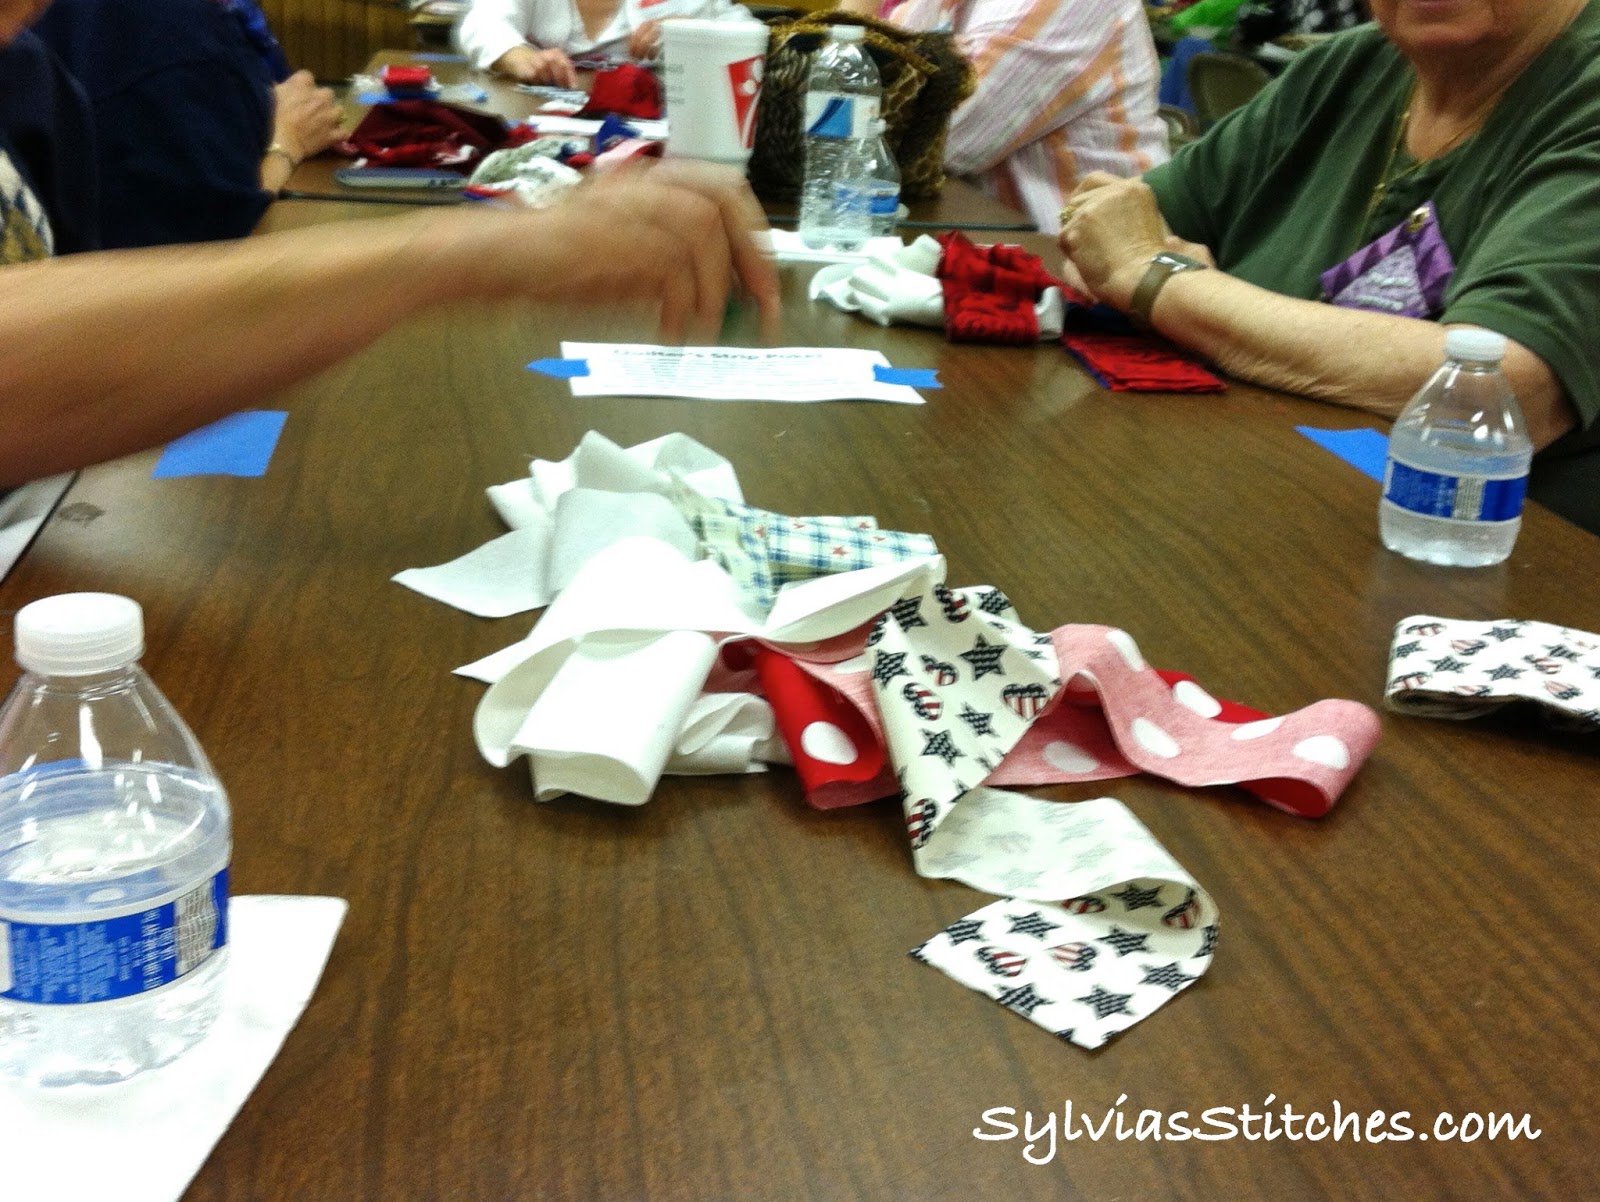 Quilters Strip Poker!